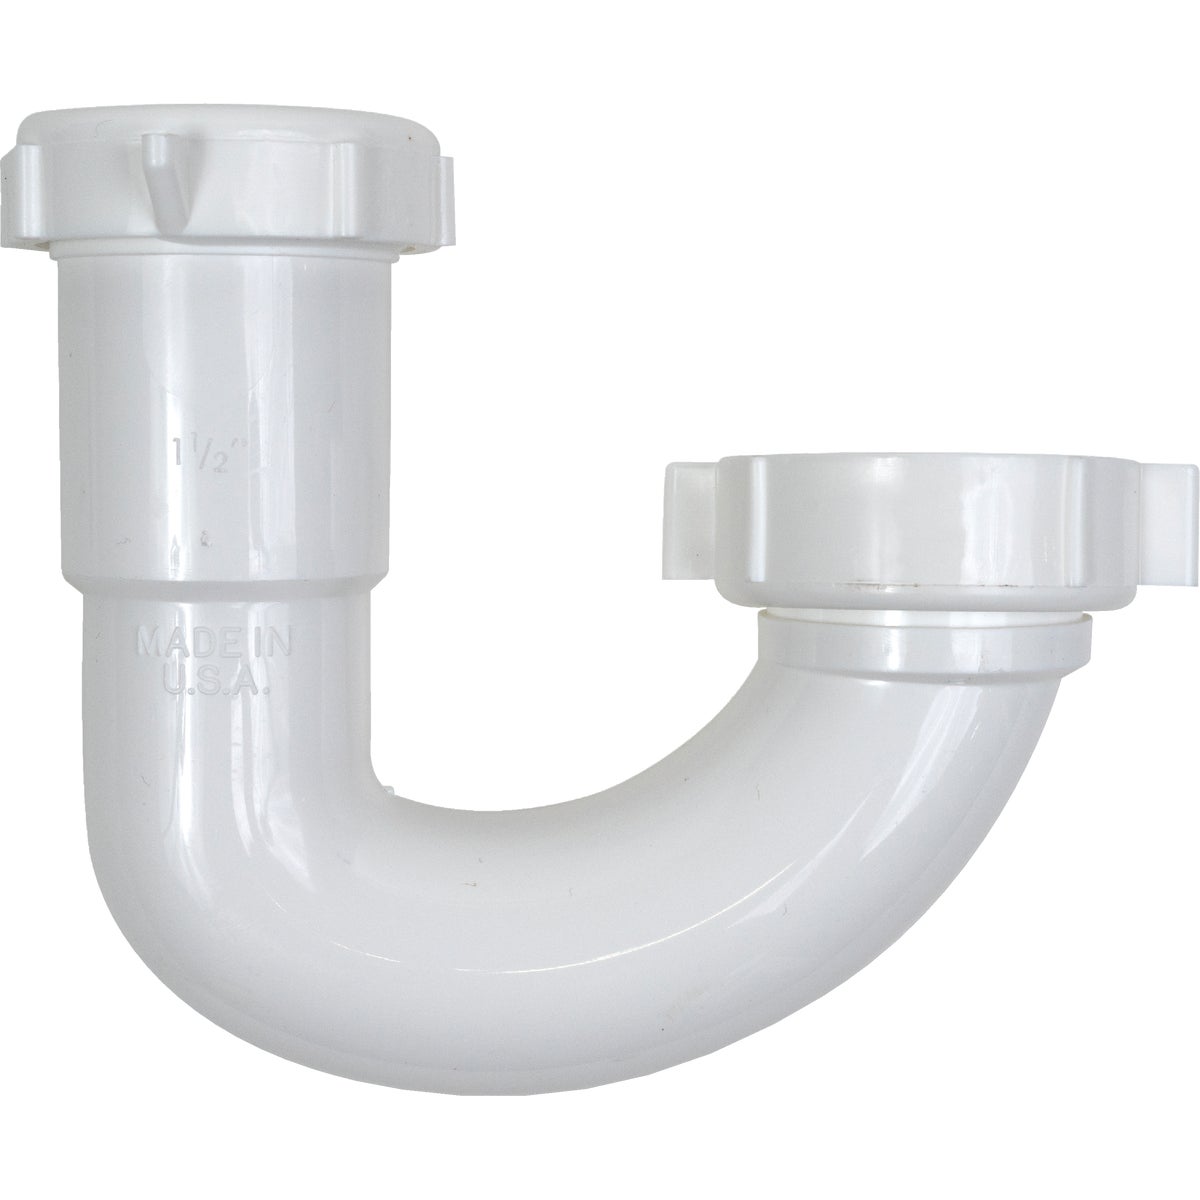 Item 444650, The Plumb Pak J bend has an outlet of 1-1/2" and an inlet of 1-1/2" or 1-1/